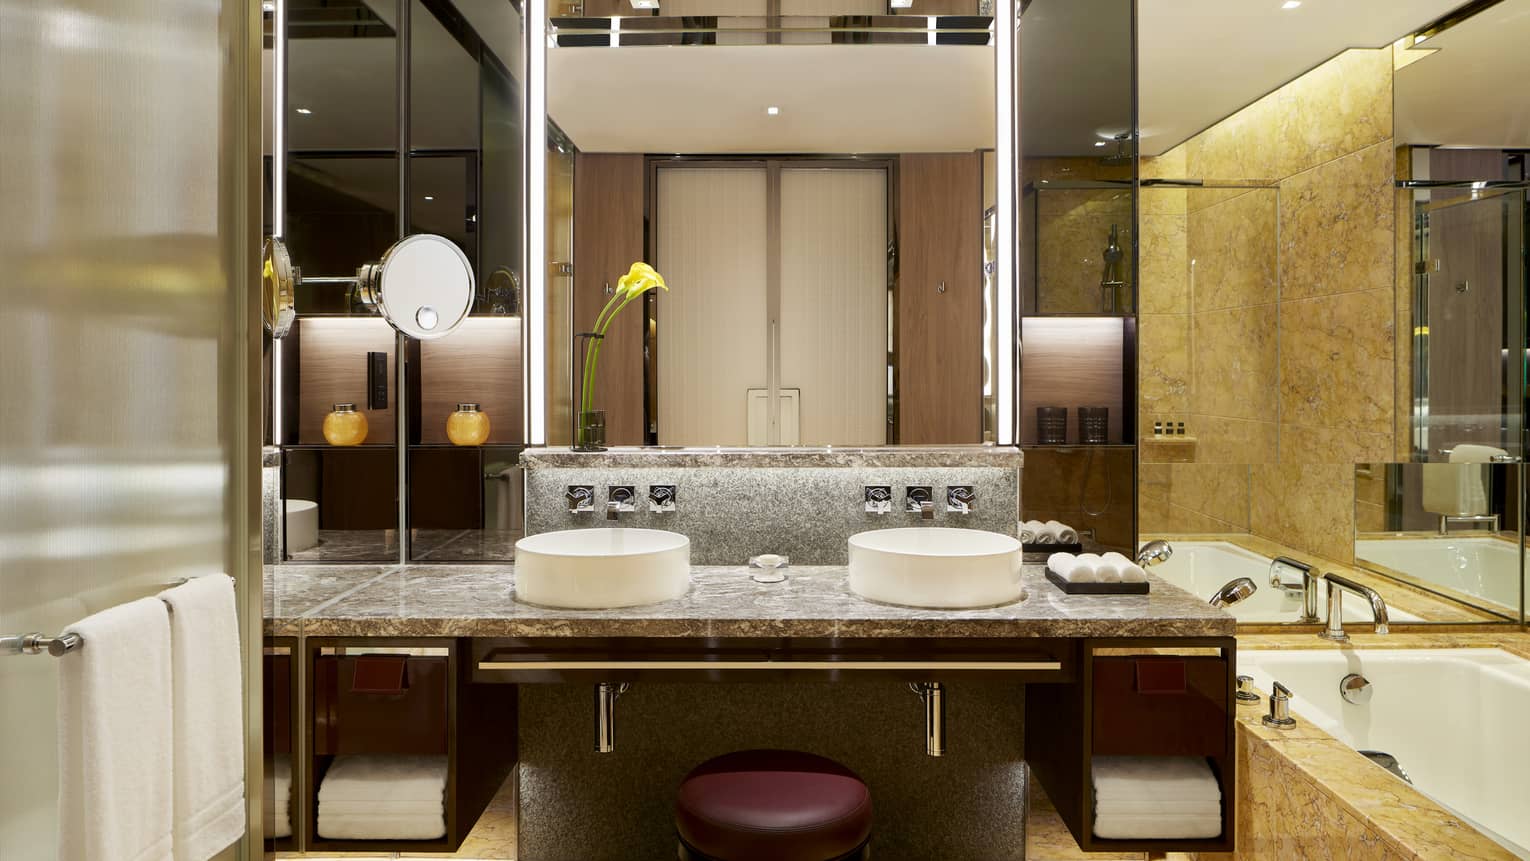 Bathroom with double vanity, tub, wall of mirrors